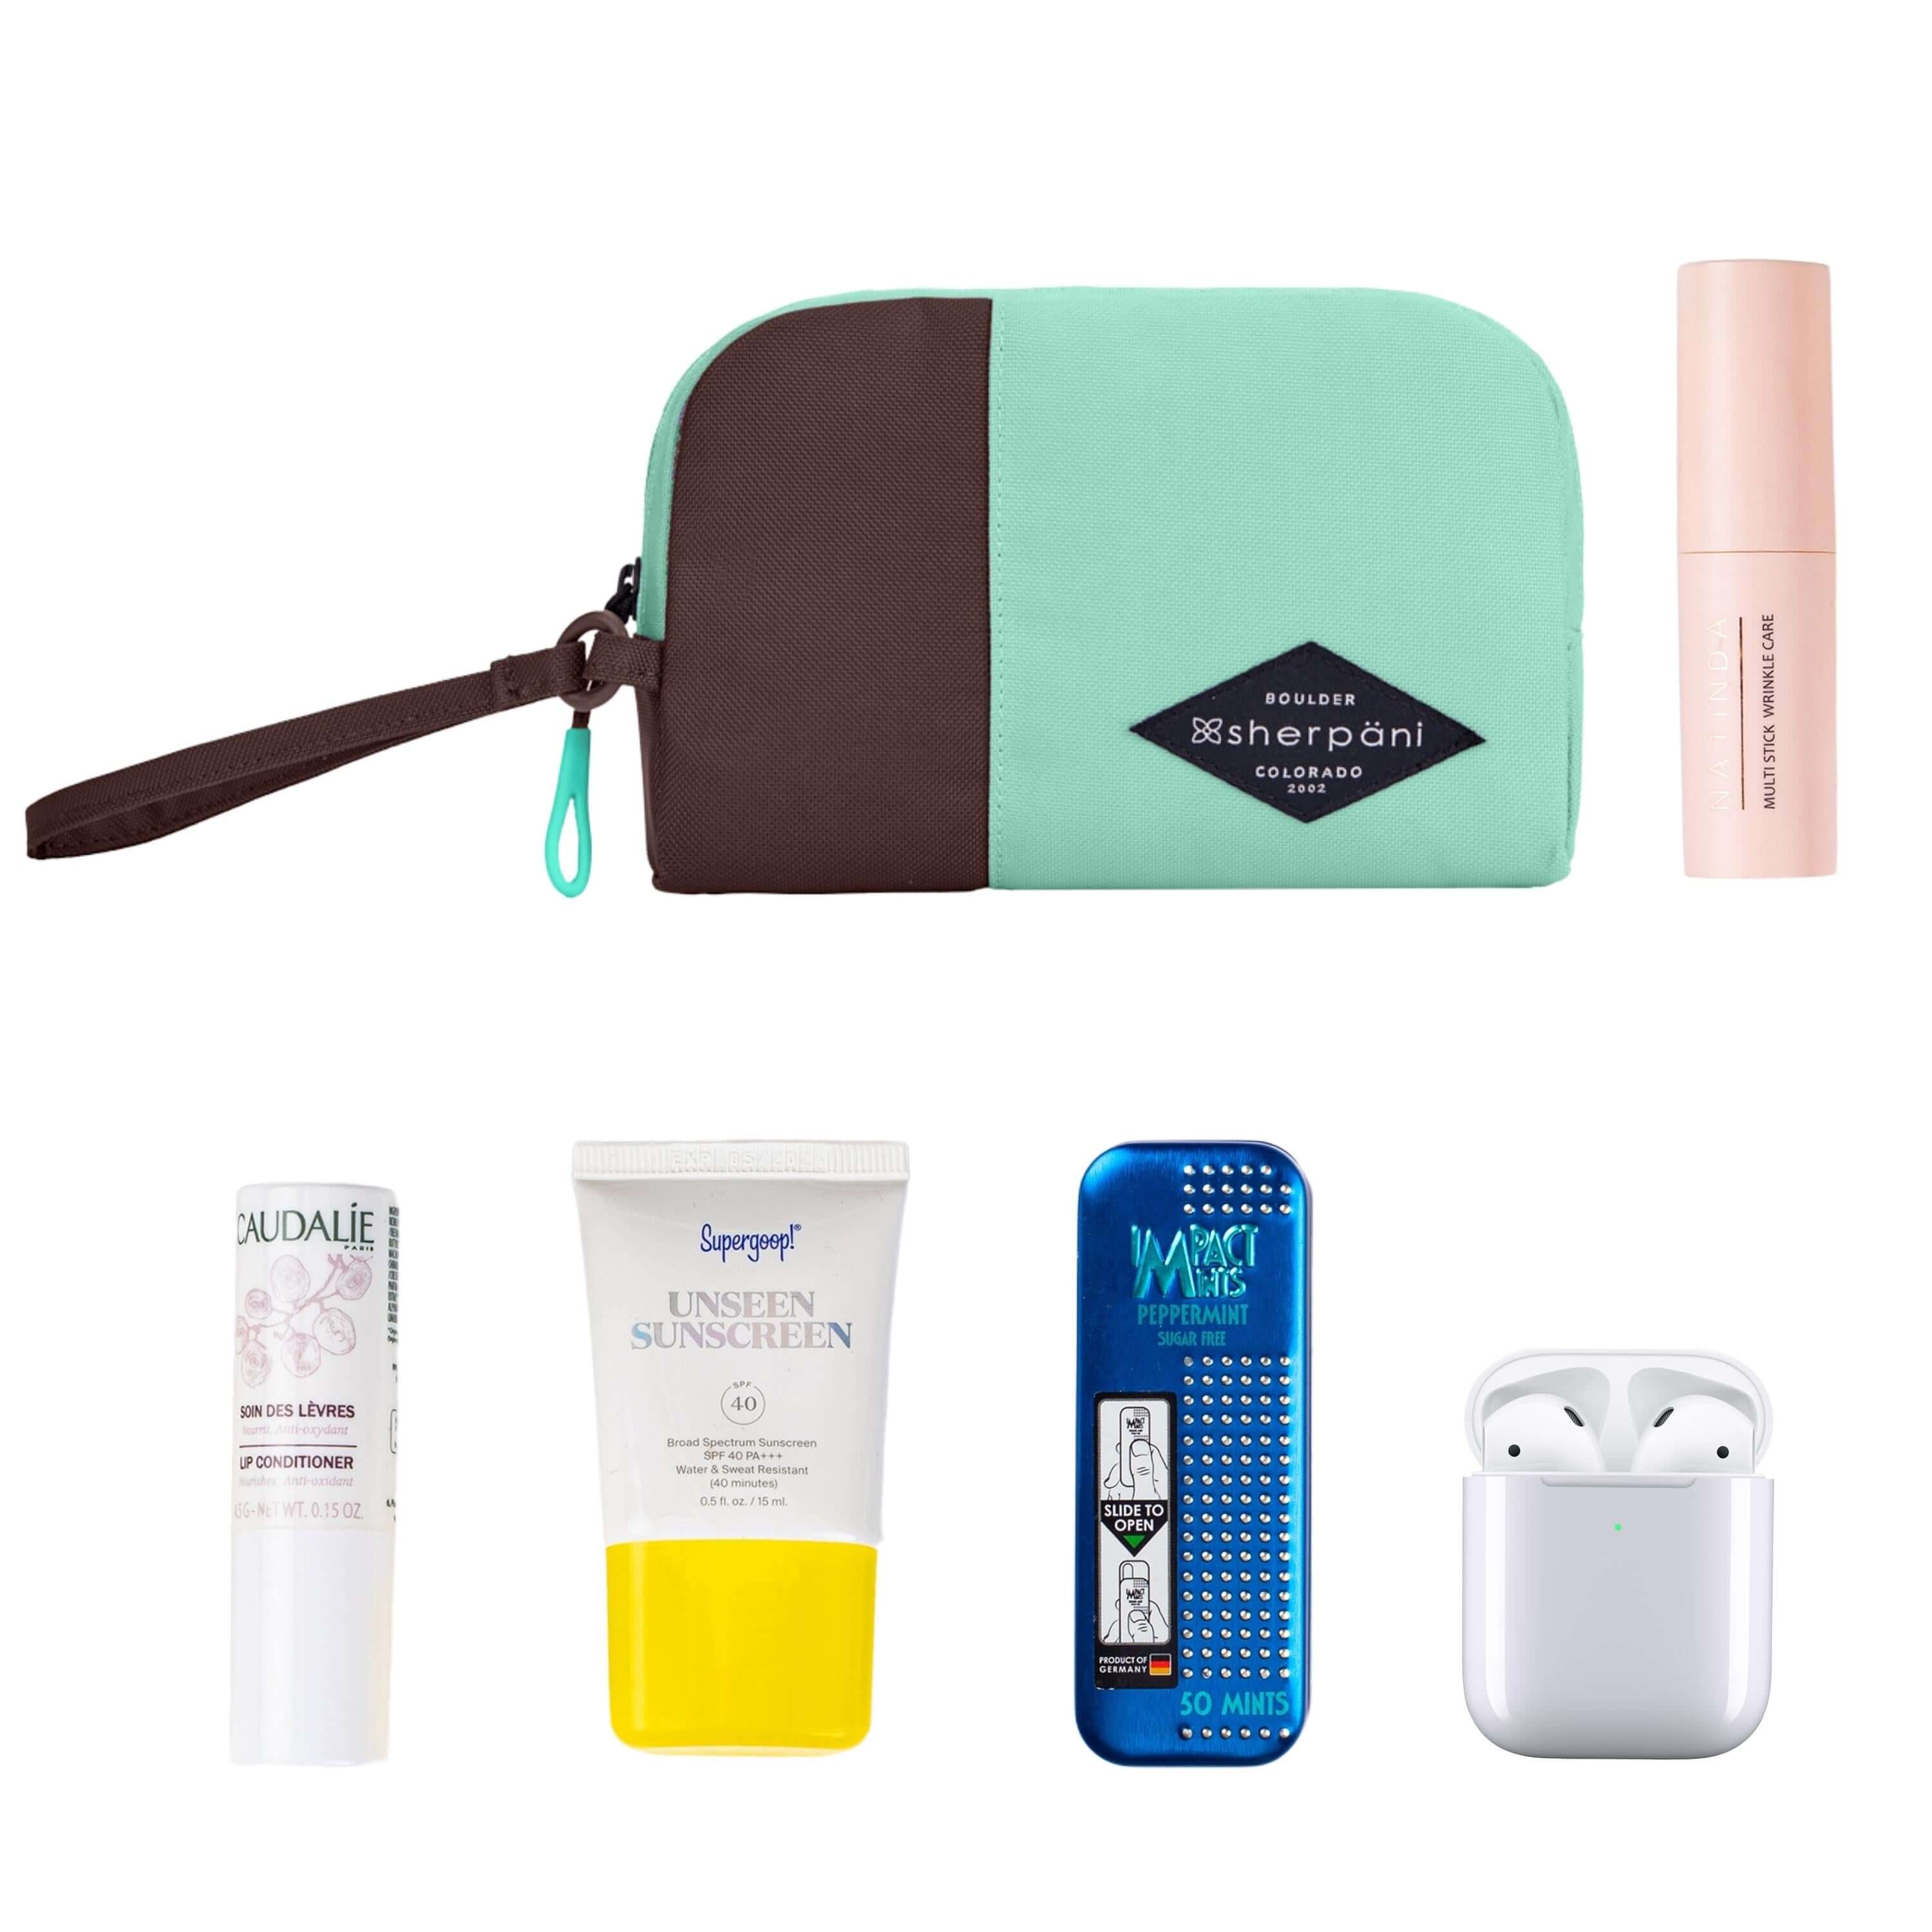 Top view of example items to fill the bag. Sherpani travel accessory, the Jolie in Seagreen in small size, lies in the upper left corner. It is surrounded by an assortment of items: beauty product, skincare product, sunscreen, mints and AirPods. 